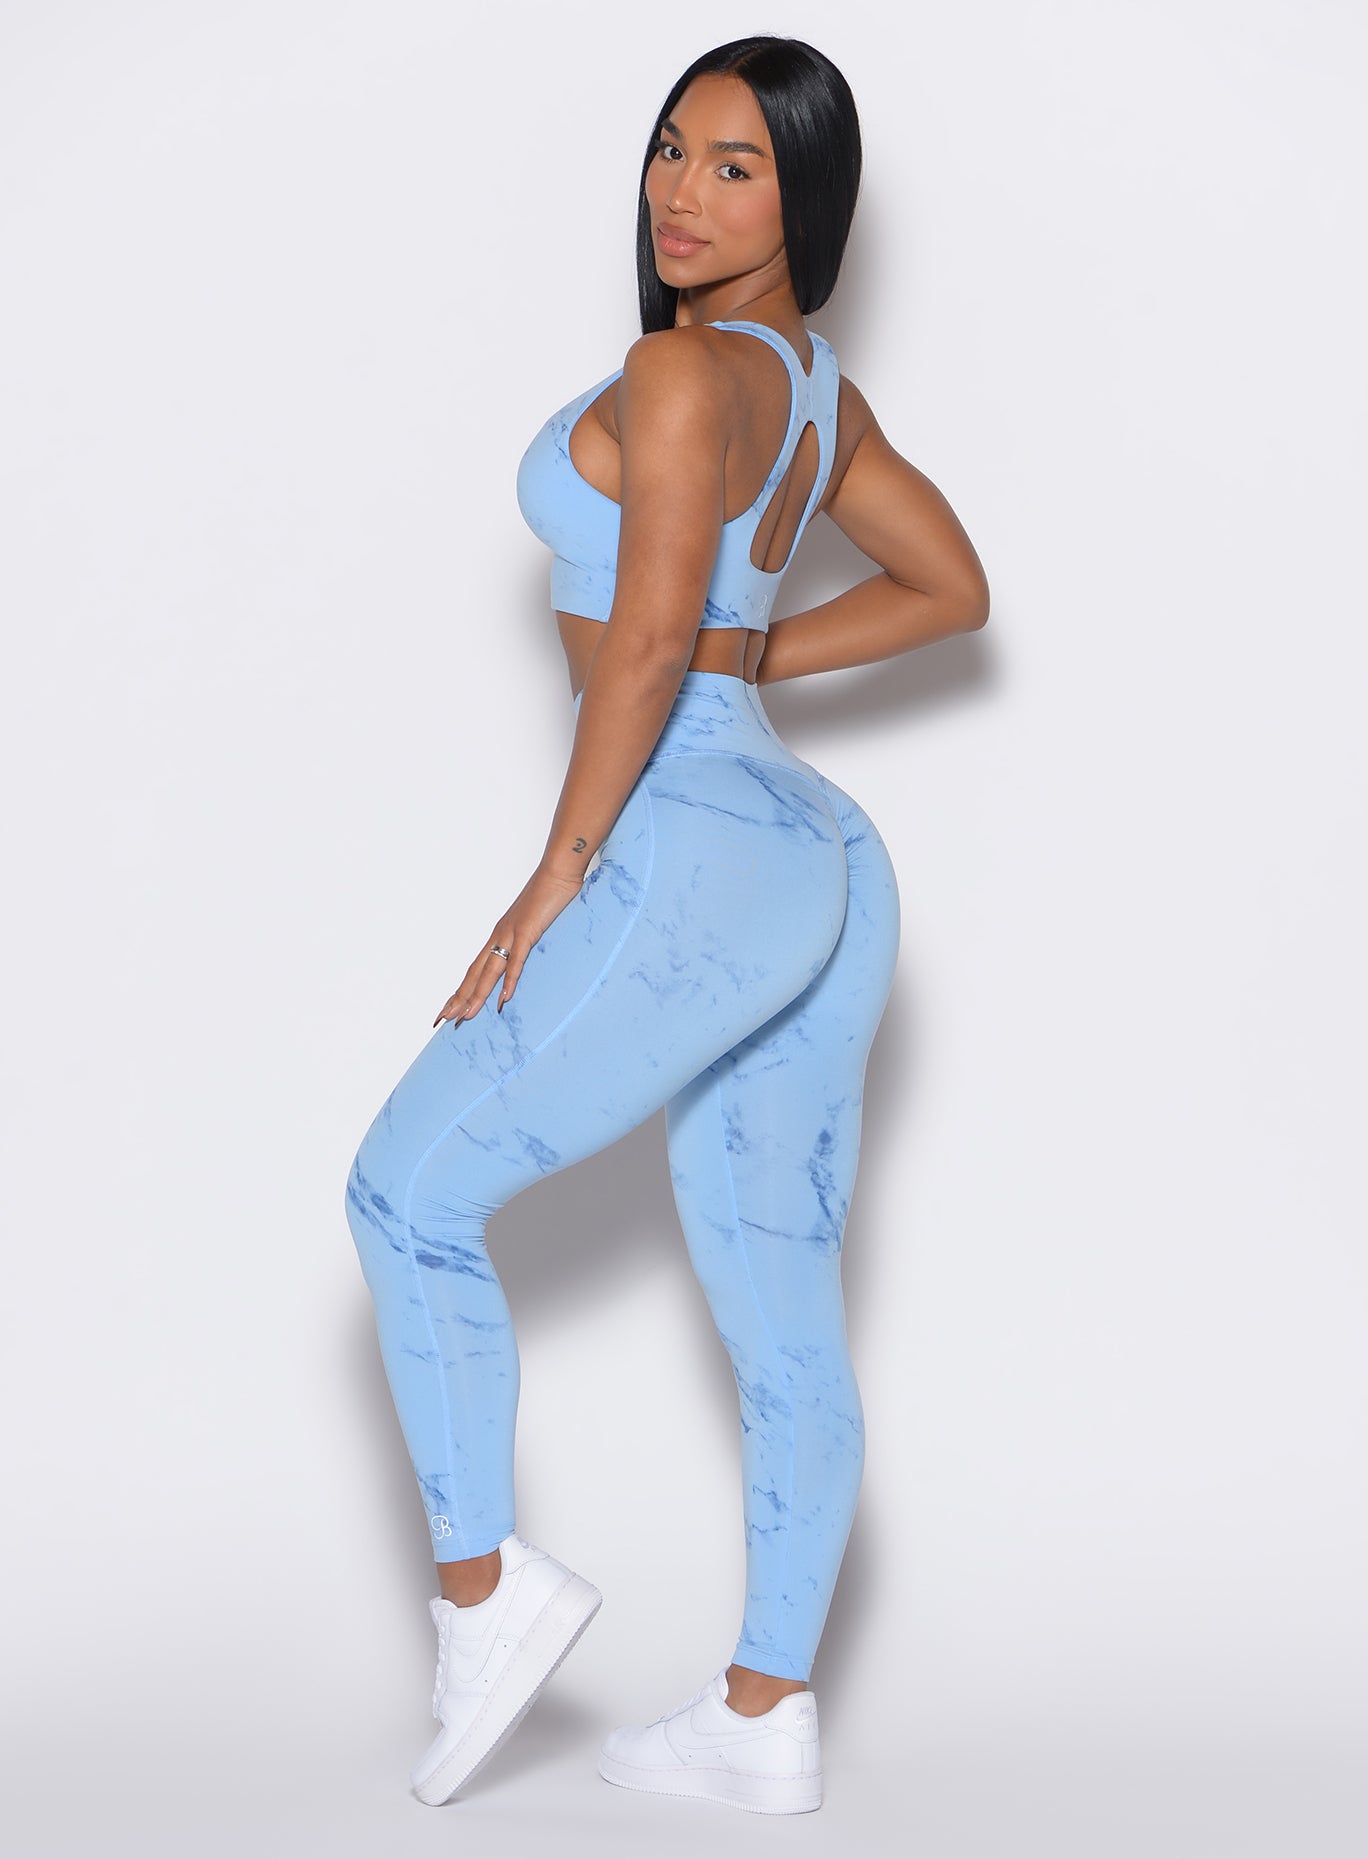 left side  profile view of a model facing to her left wearing our fit marble leggings in Blue Jay color along with a matching bra